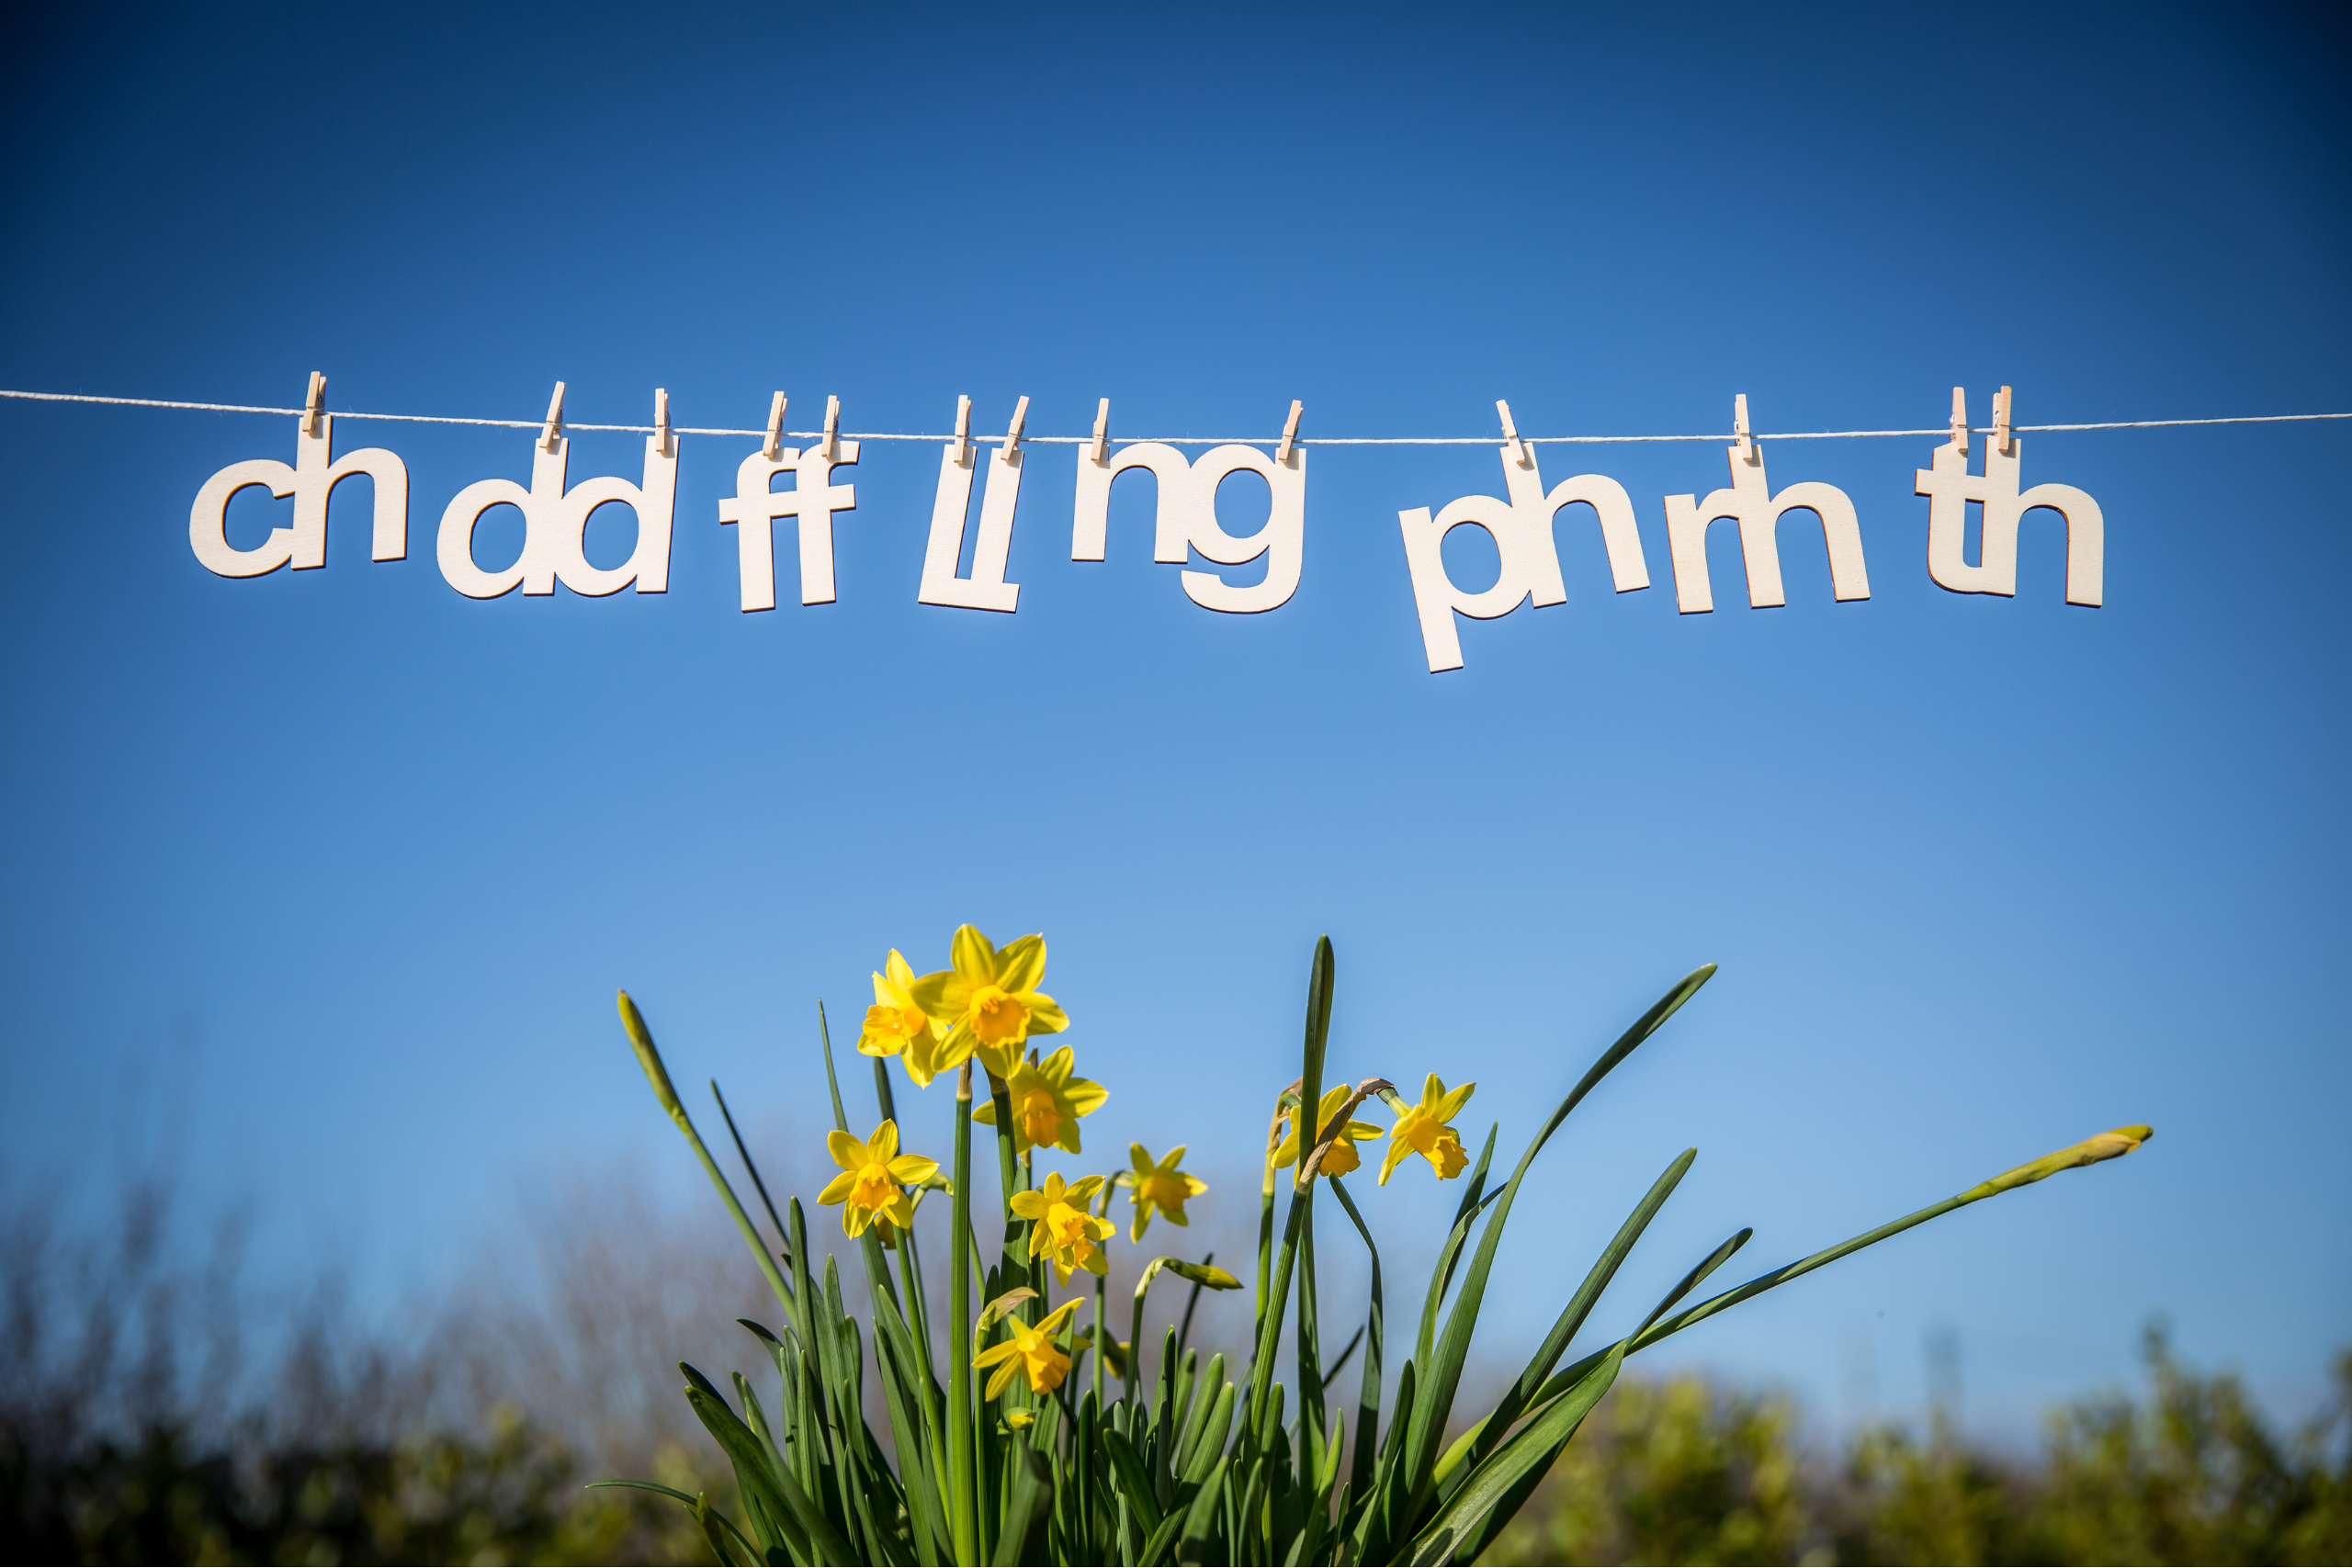 Welsh letters hanging by pegs on a clothes line. Beneath are some daffodils.